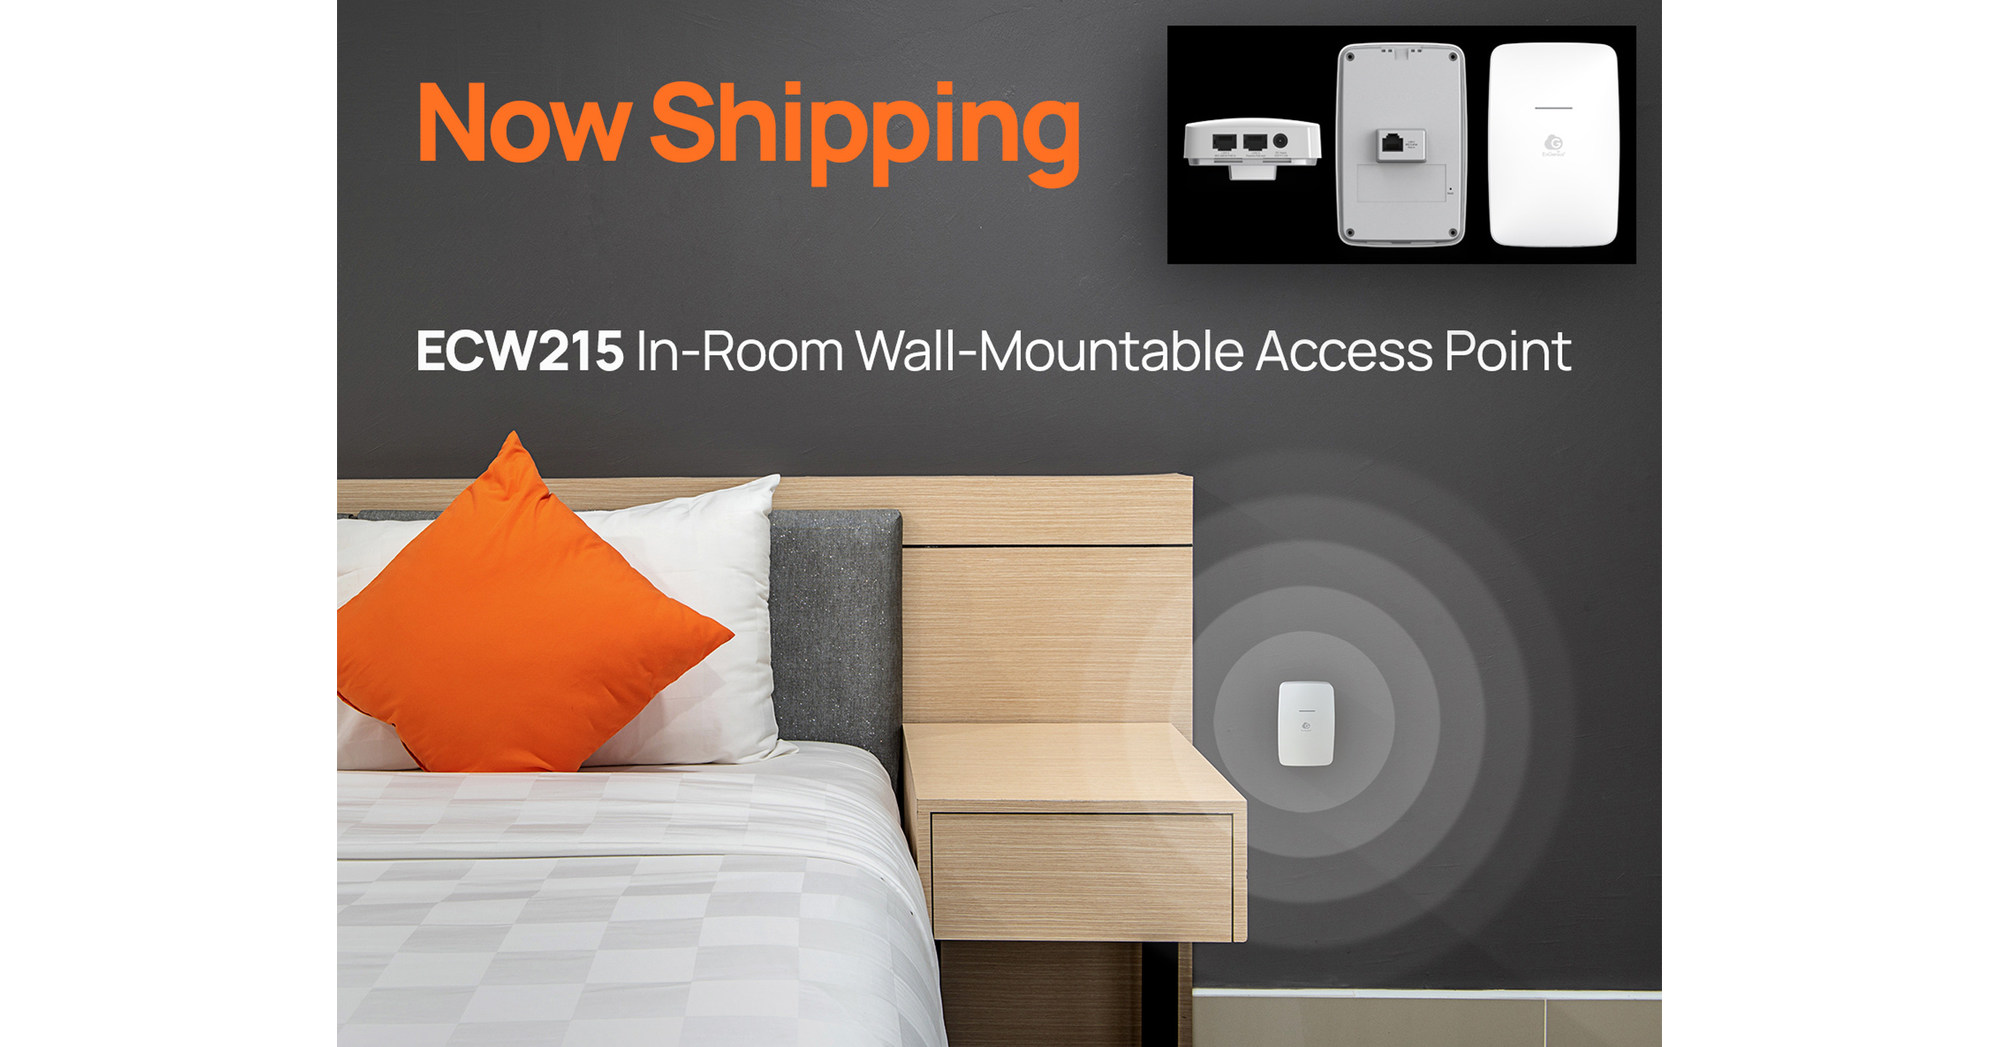 EnGenius announces its first Wi-Fi 6 wall-plate access point and it looks  sleek 